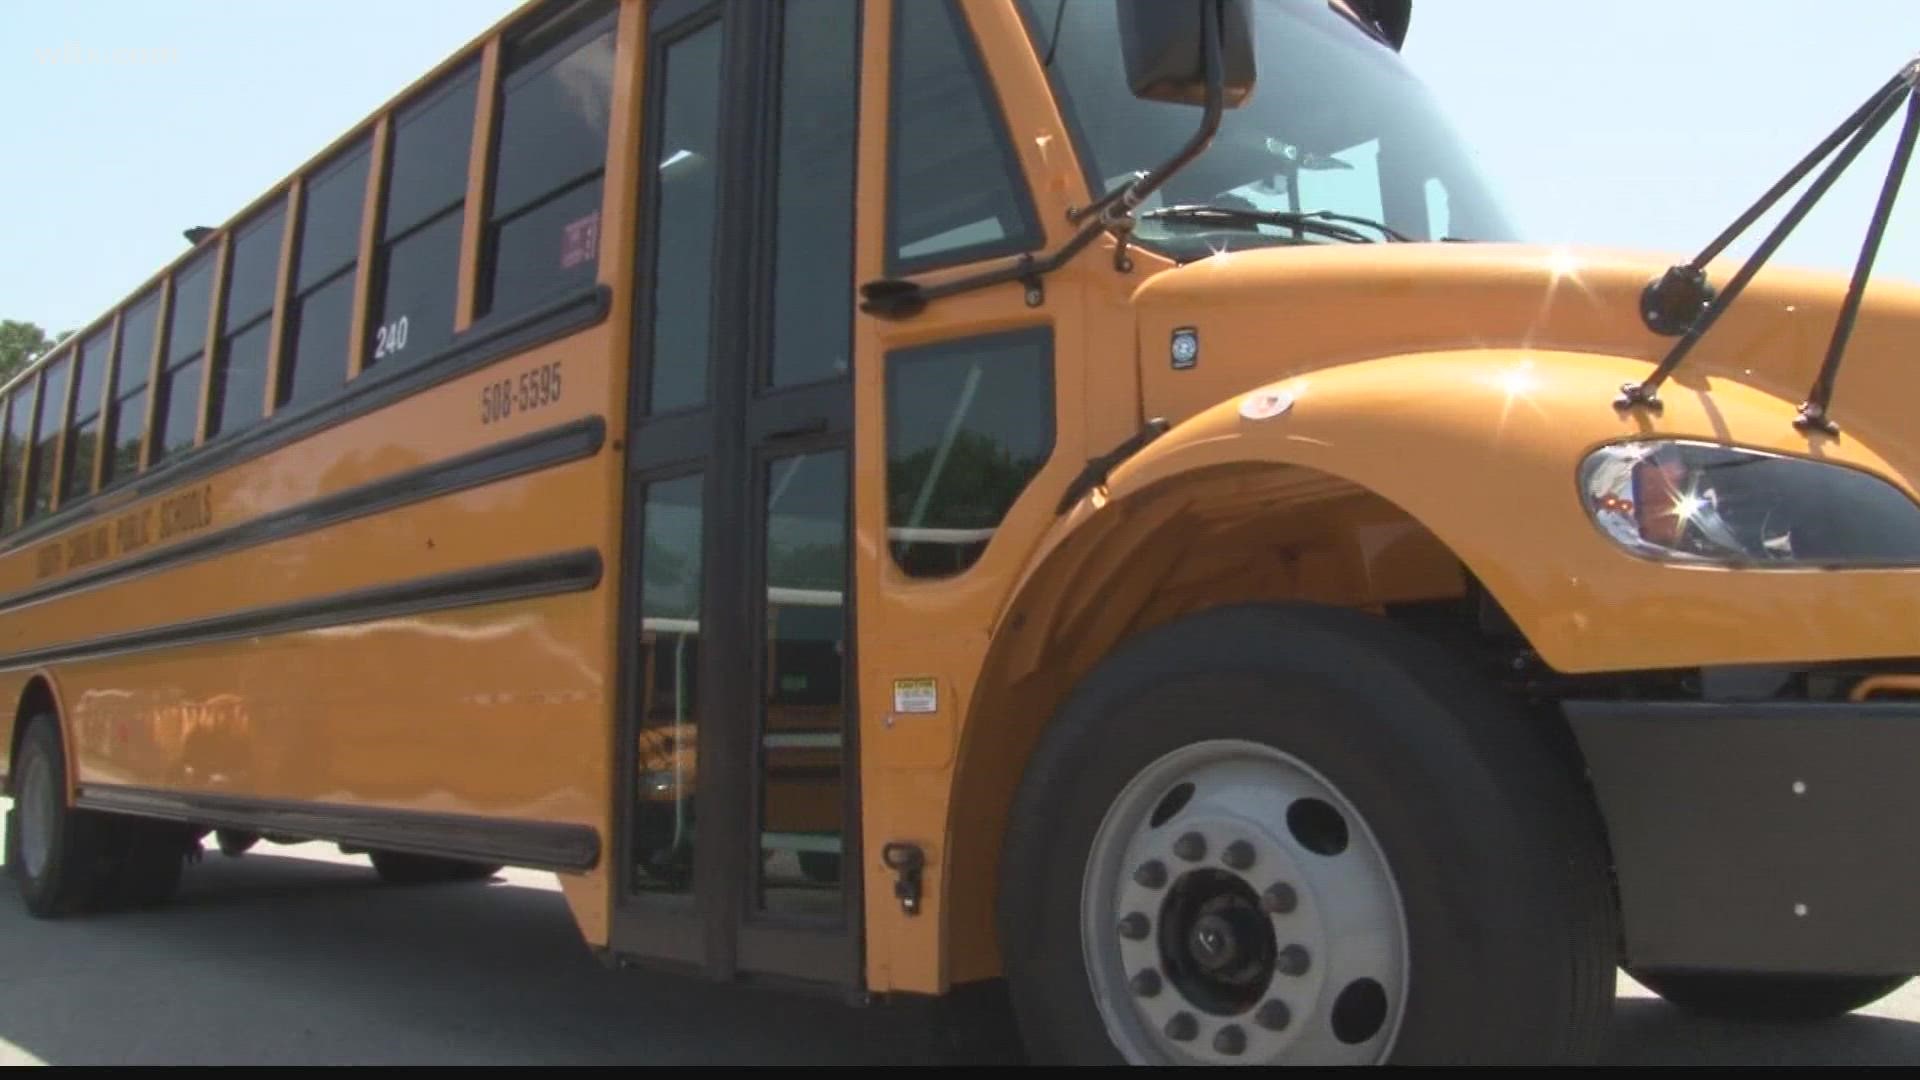 Districts are working to hire more than 100 bus drivers ahead of the start of the new school year.